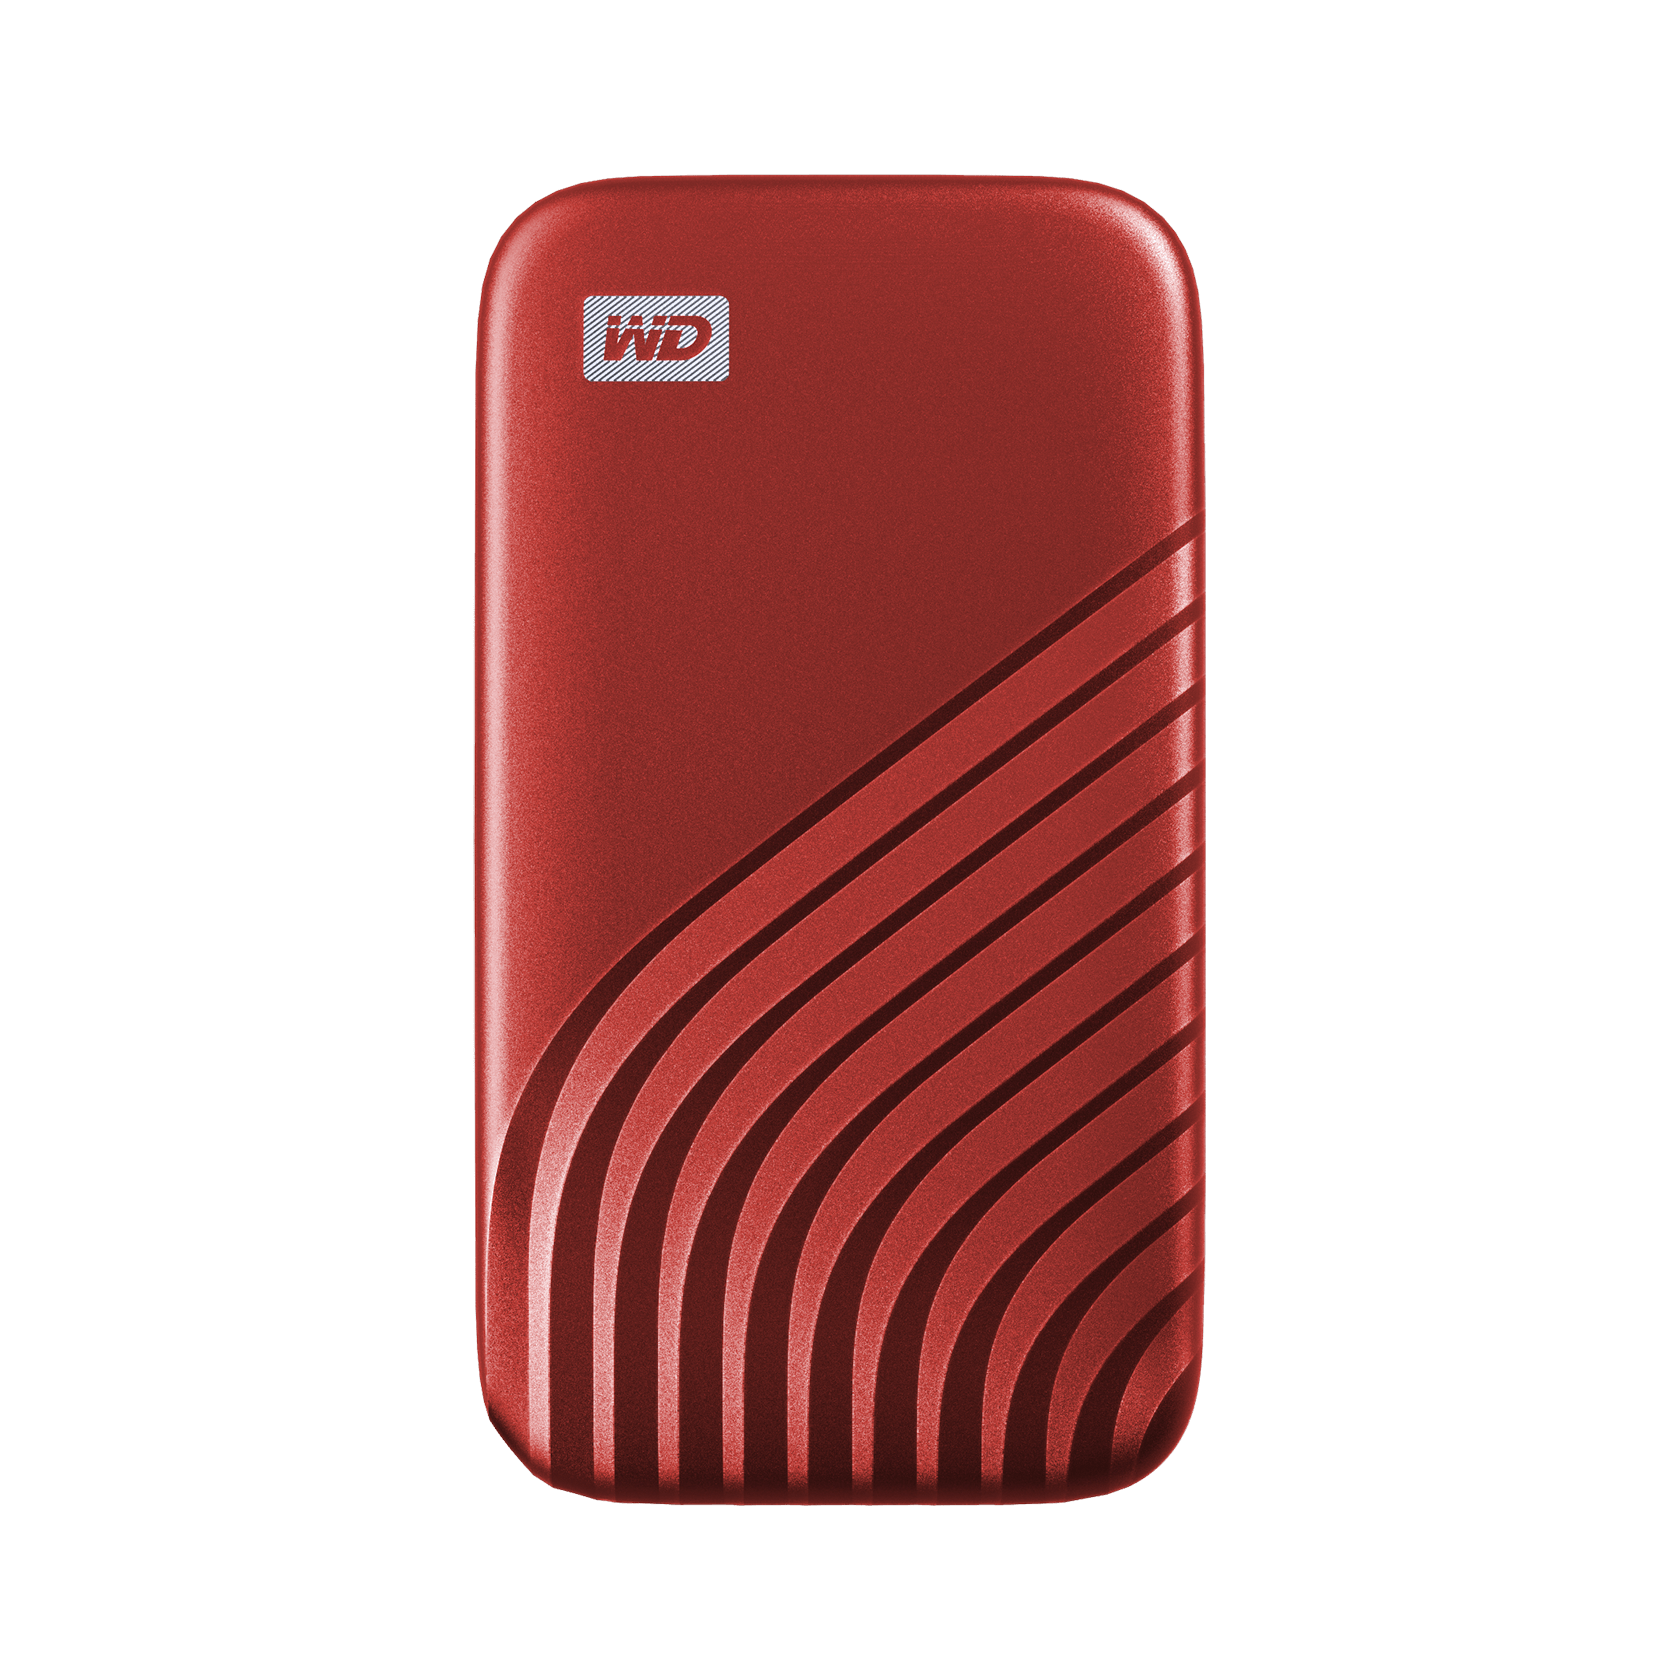 WD 1TB My Passport SSD, Portable External Solid State Drive, Red - WDBAGF0010BRD-WESN - image 1 of 8